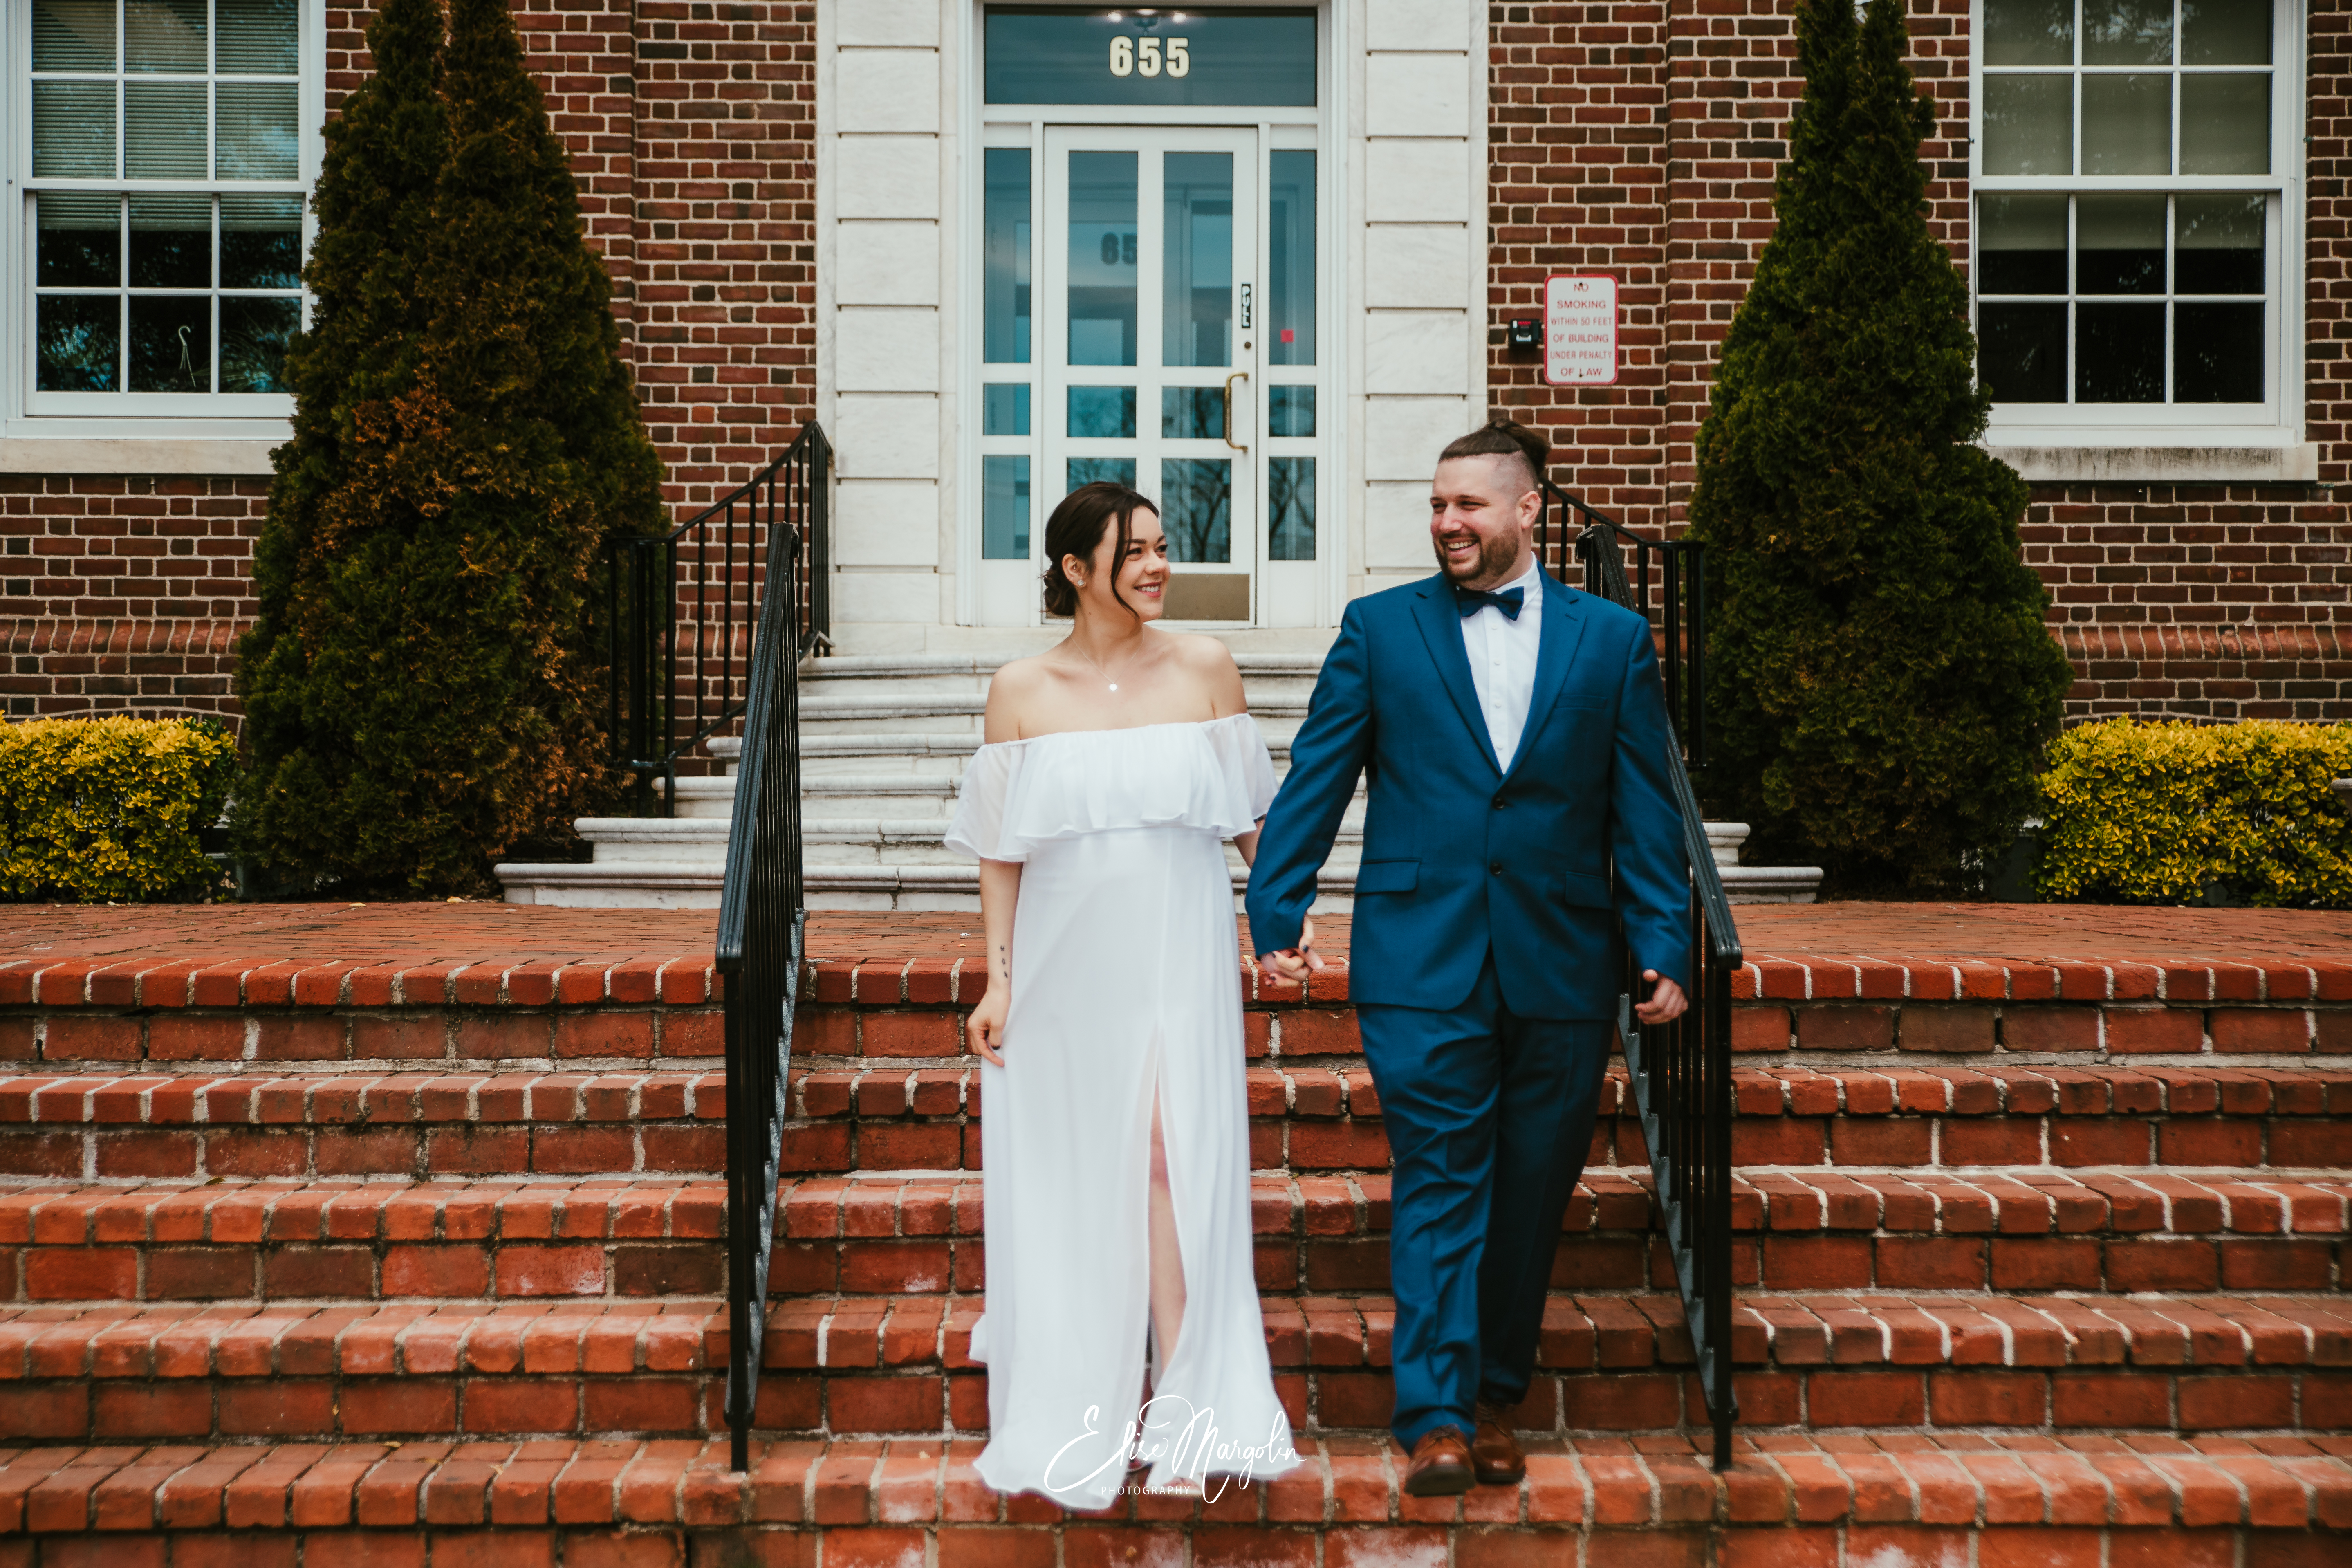 Kristin and Michael holding hands and smiling as they walk down the brick steps outside Islip Town Hall after their intimate wedding ceremony. Kristin is wearing an off-the-shoulder white gown, and Michael is dressed in a navy blue suit with a bow tie.